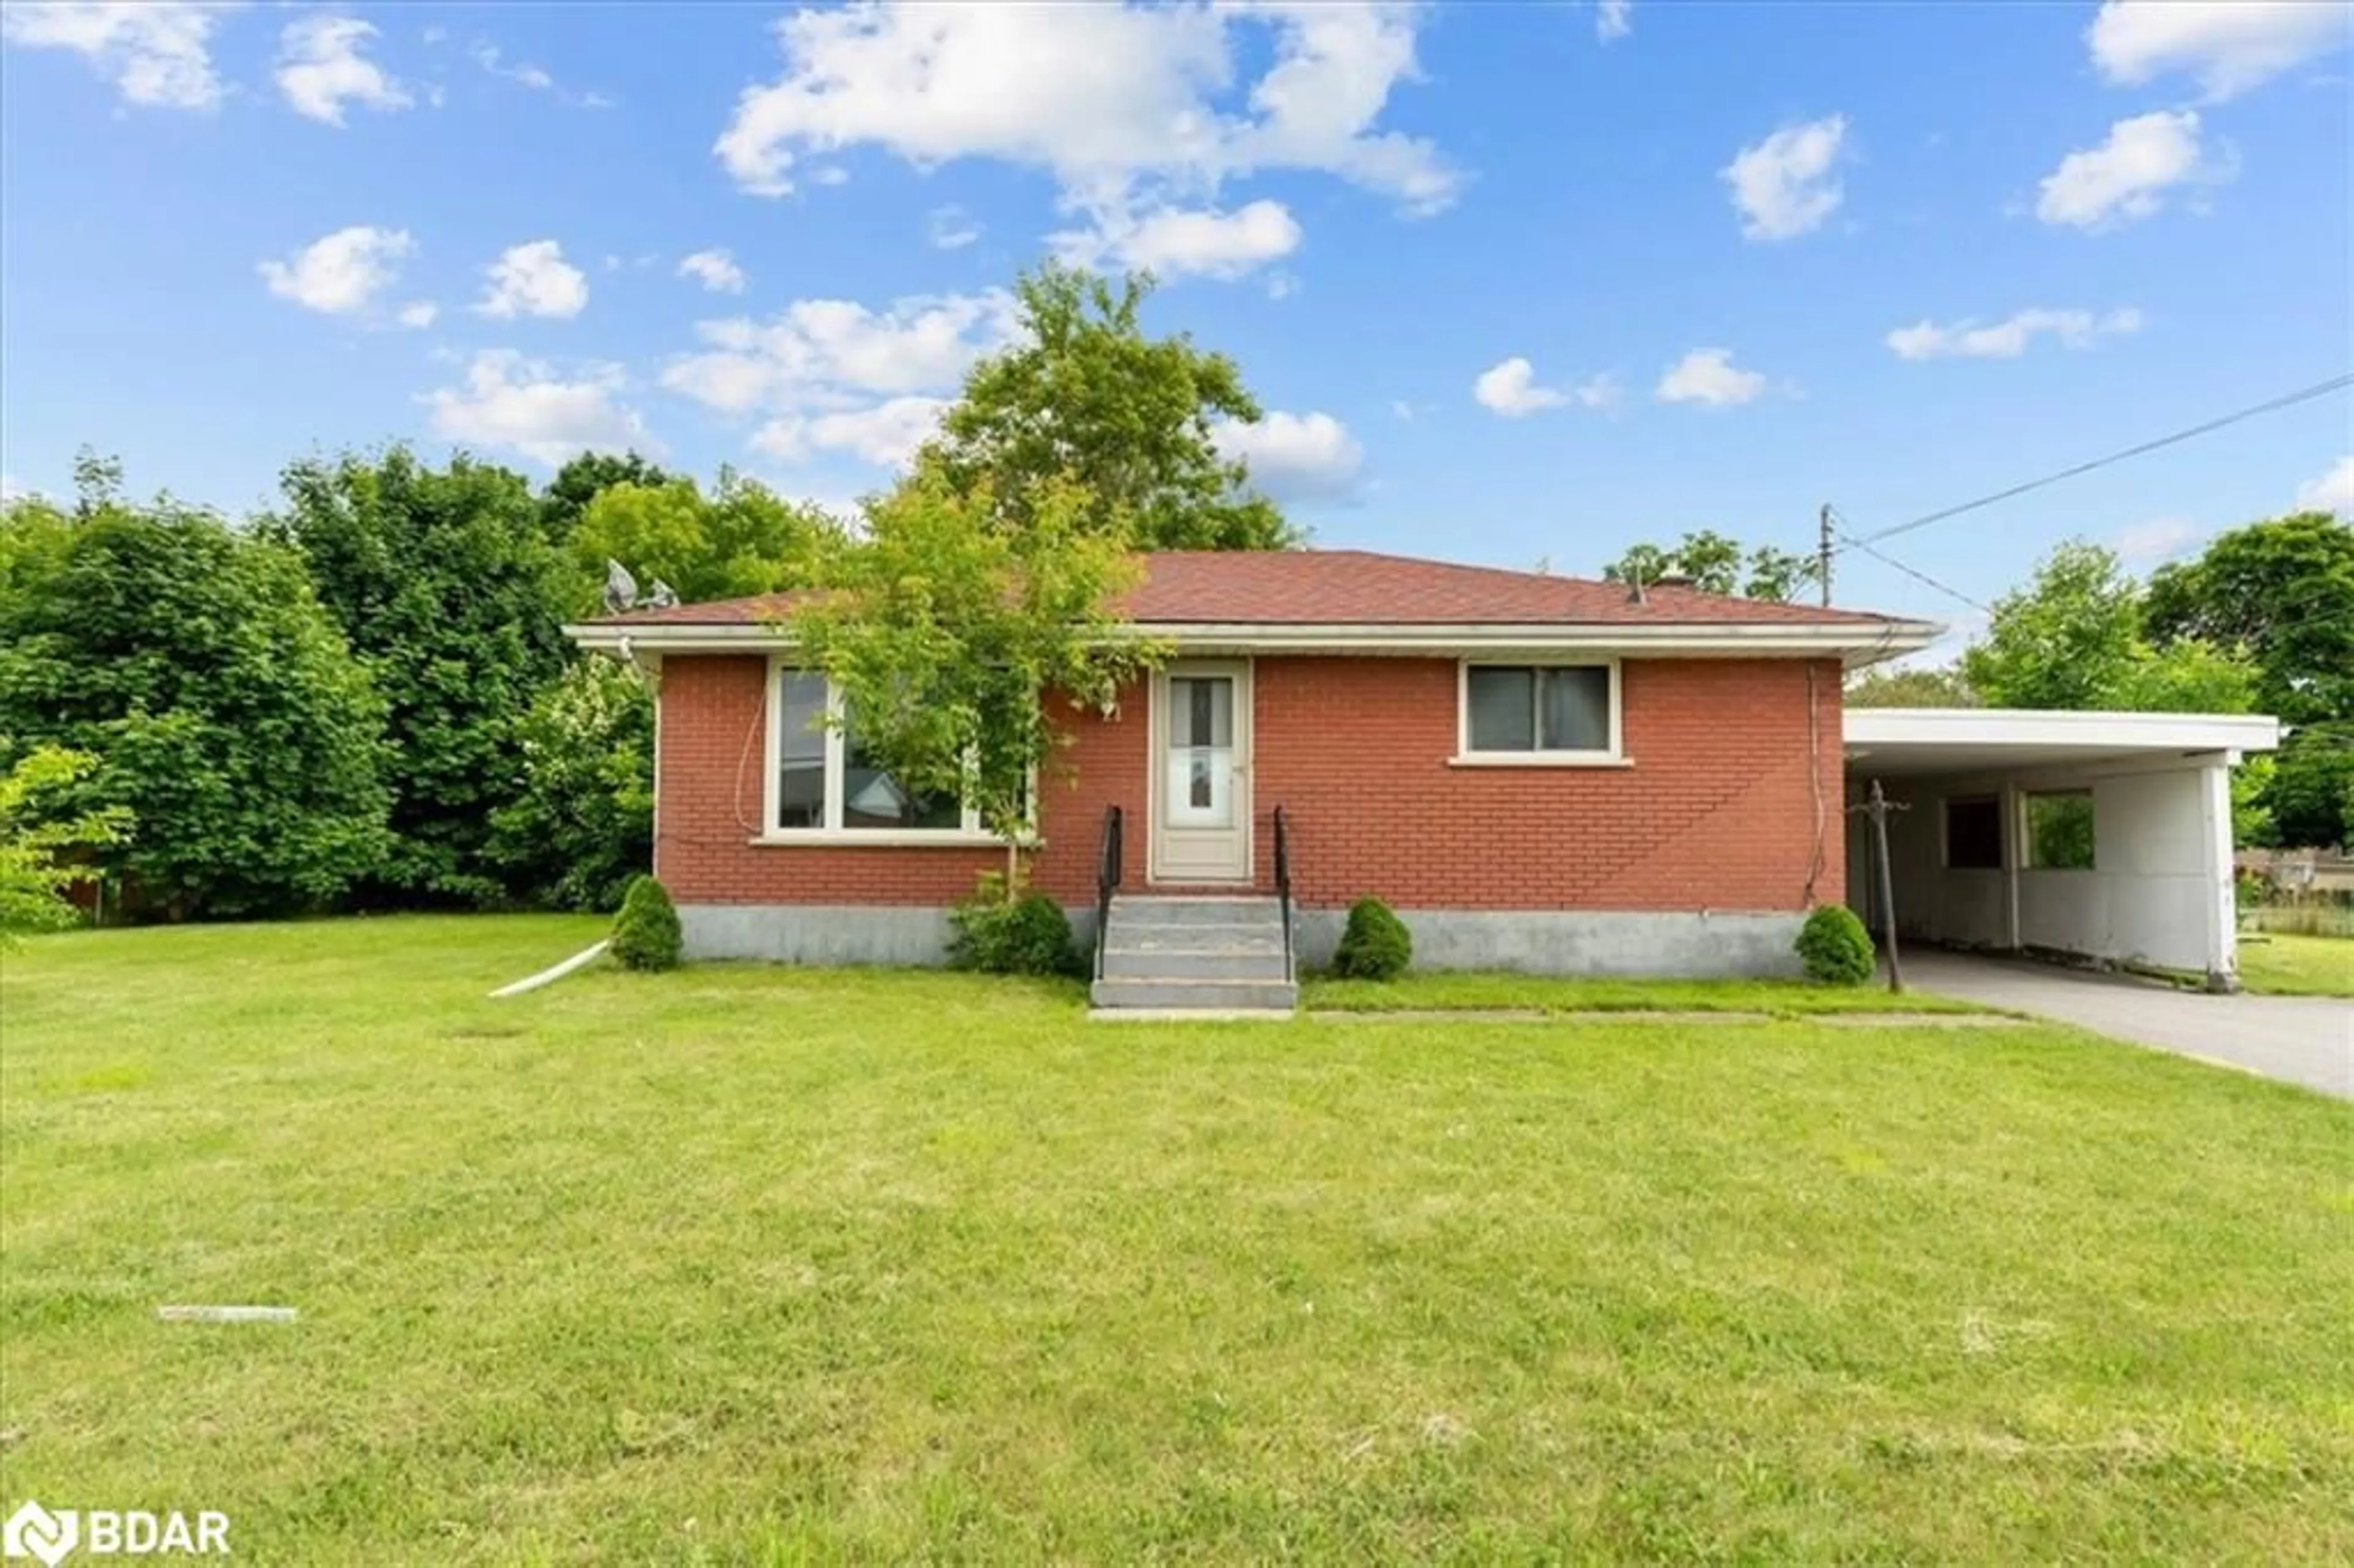 Home with brick exterior material for 21 Parkdale Dr, Belleville Ontario K8P 2P3